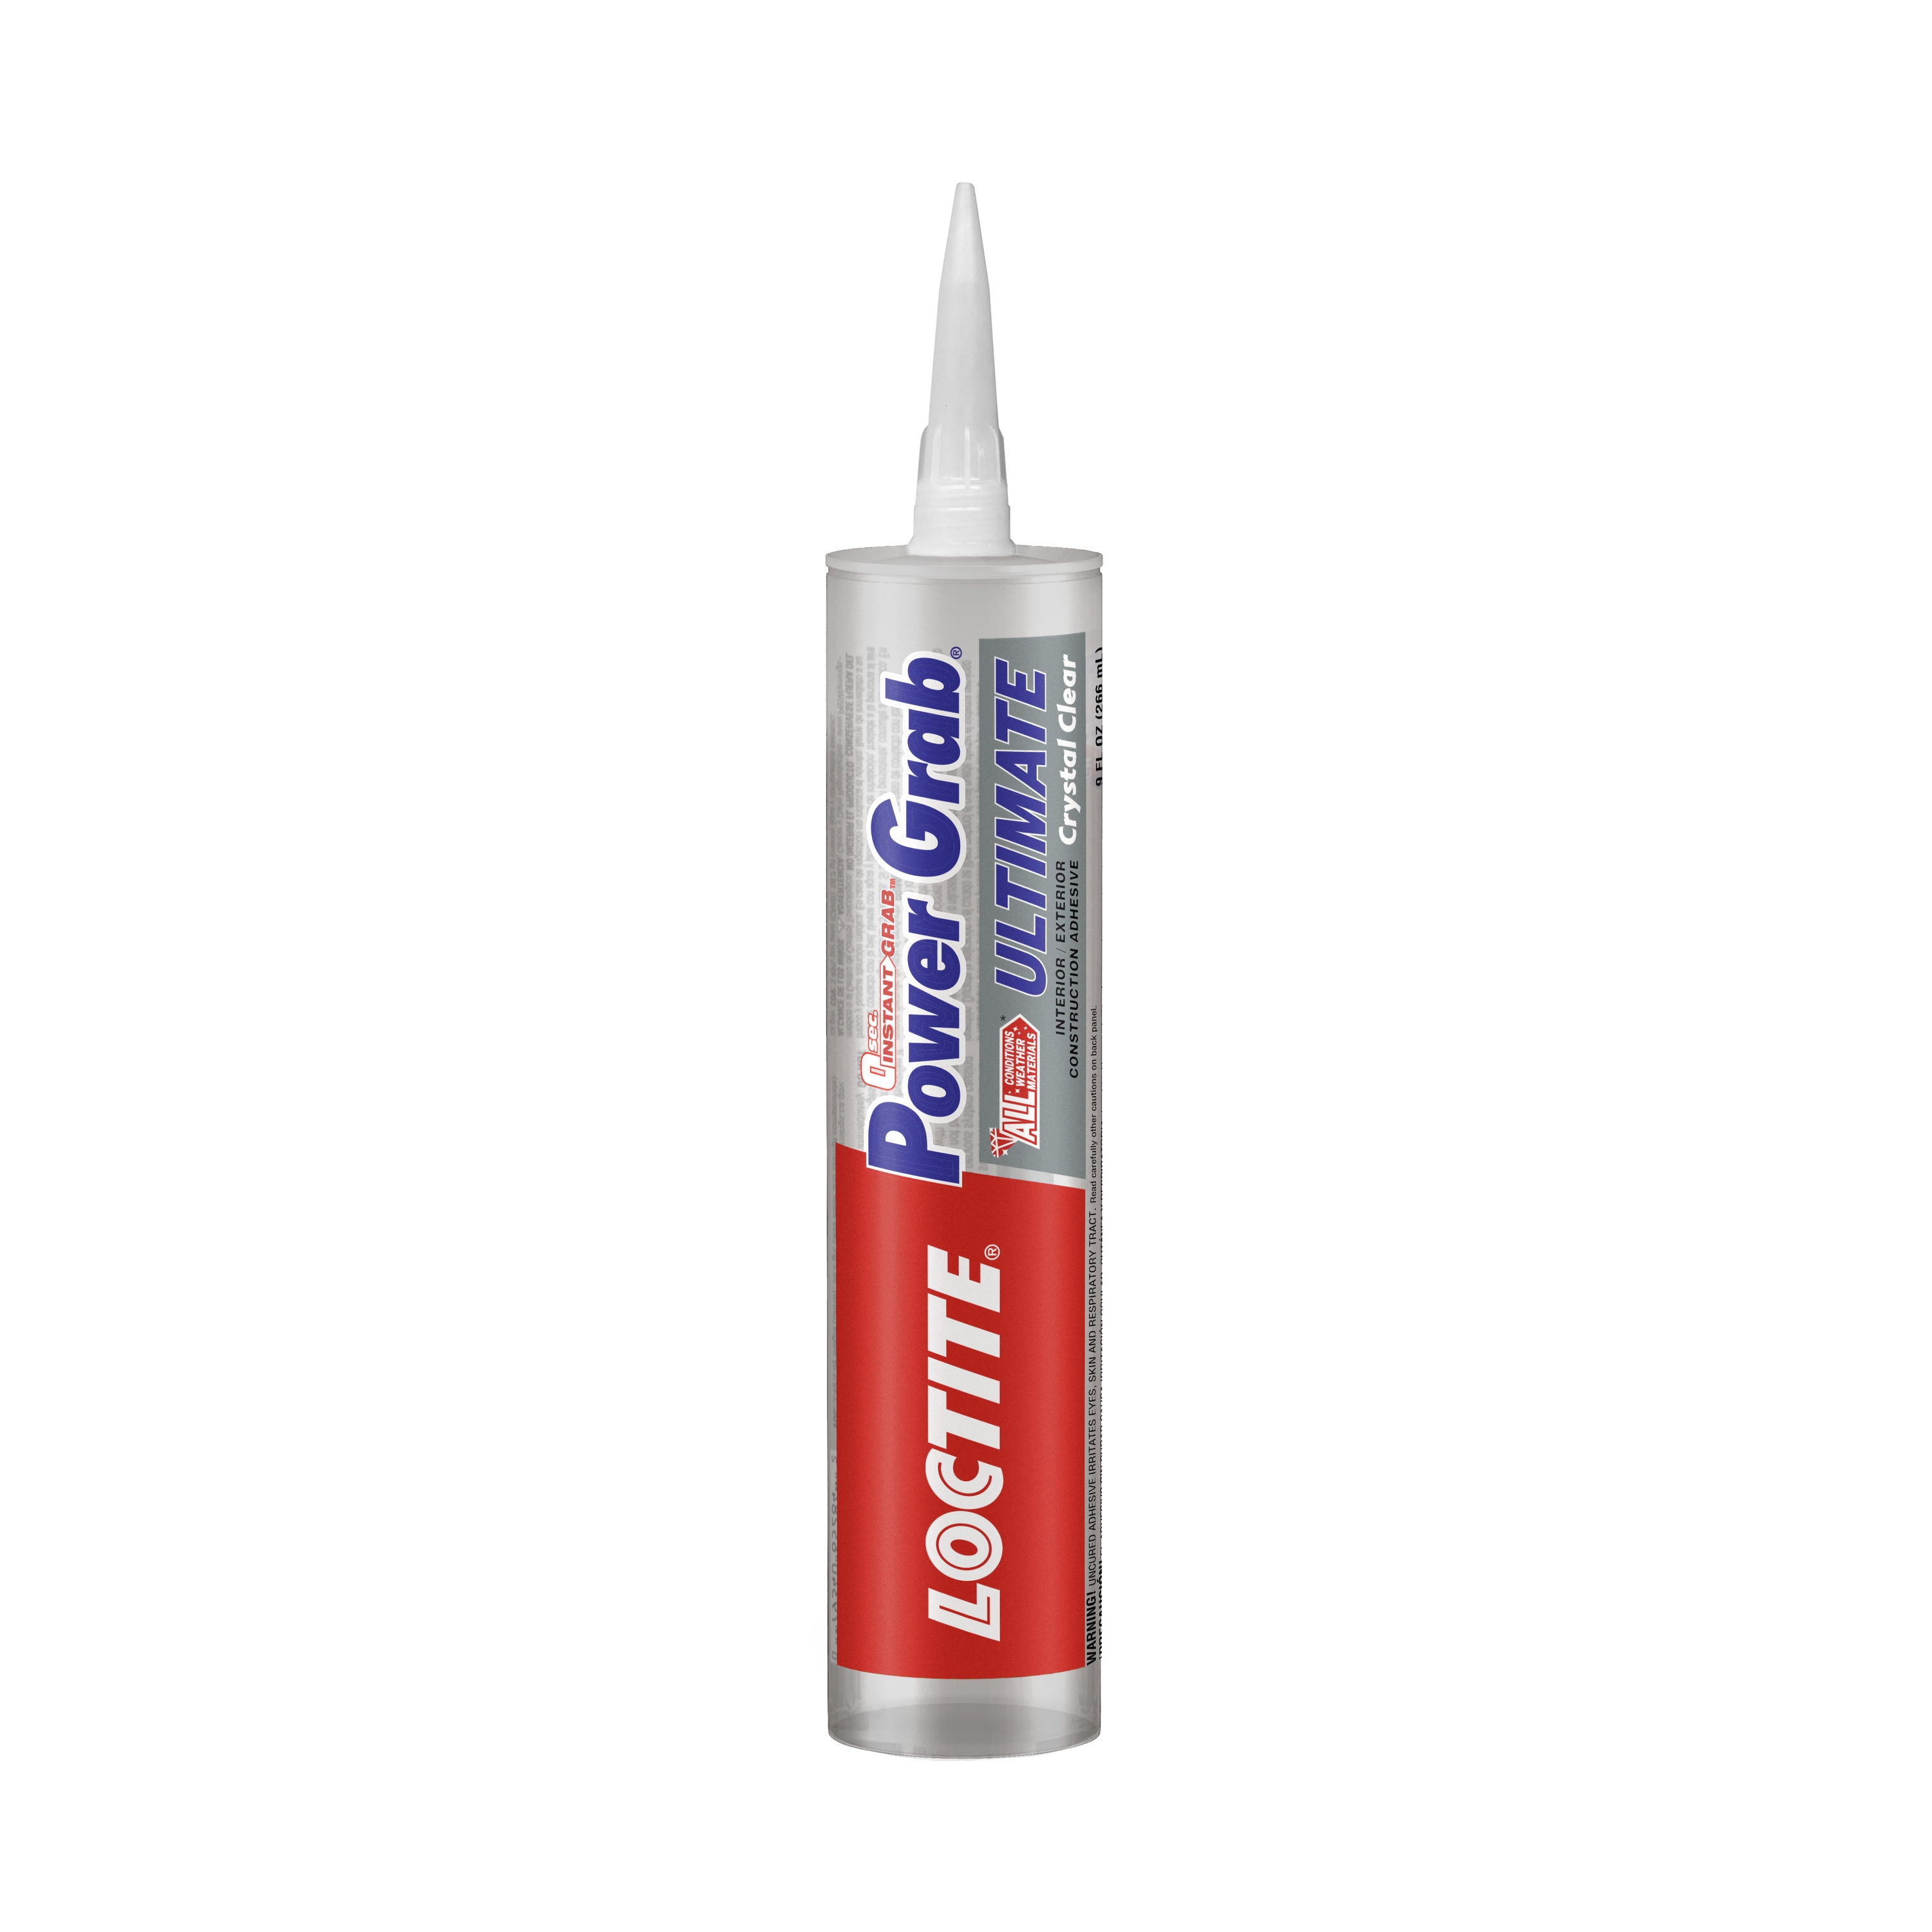 Powerhold 525 Spray Contact Adhesive, Projects, Flooring, Crafts